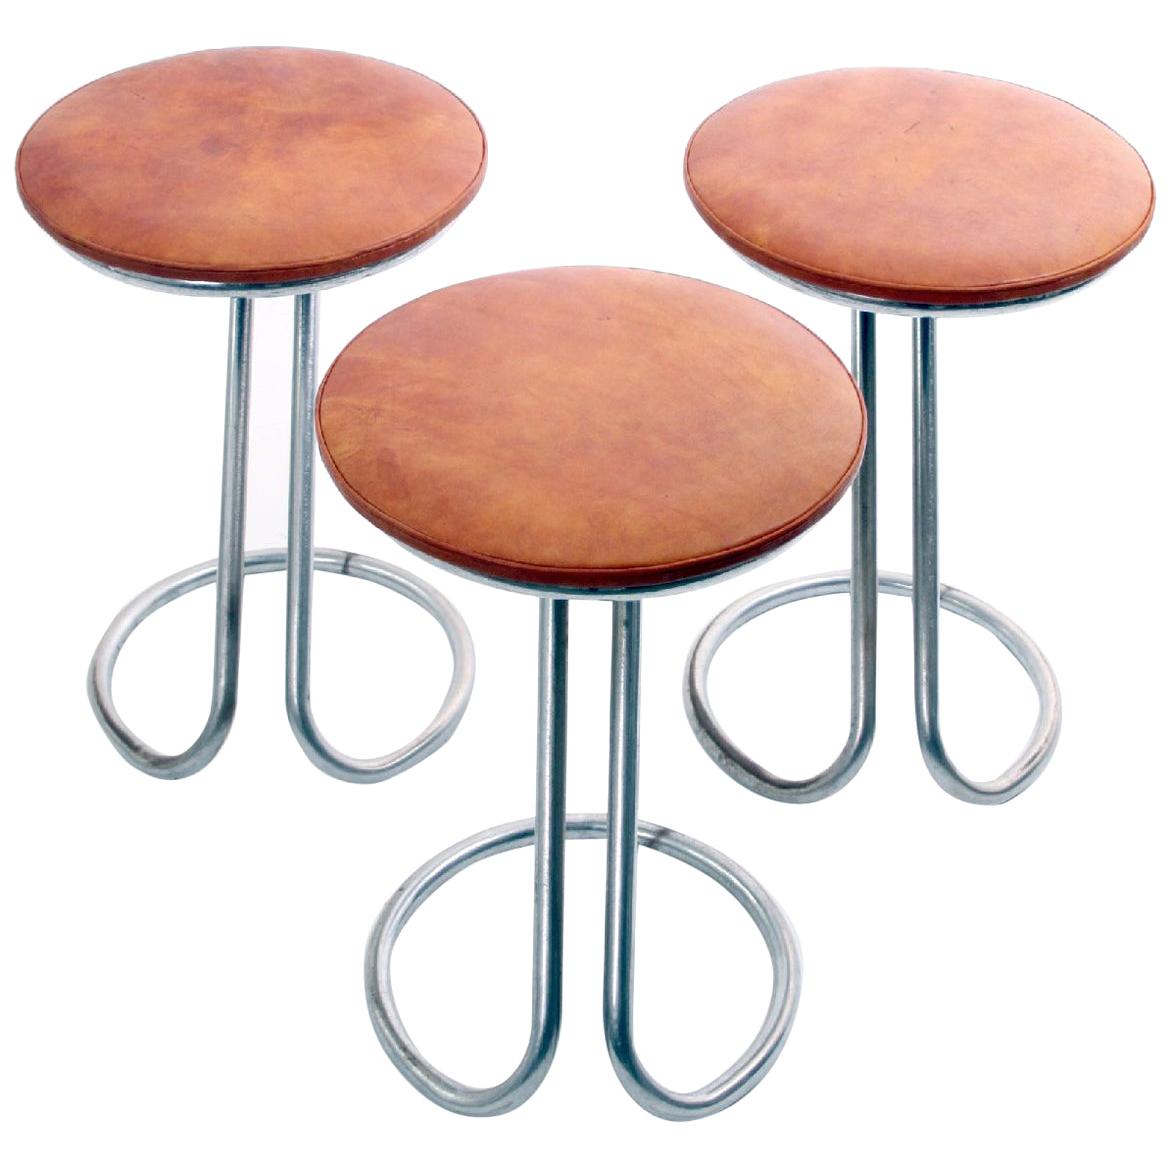 Rare Z-Stools by Gilbert Rohde with Leather Seats, 1933